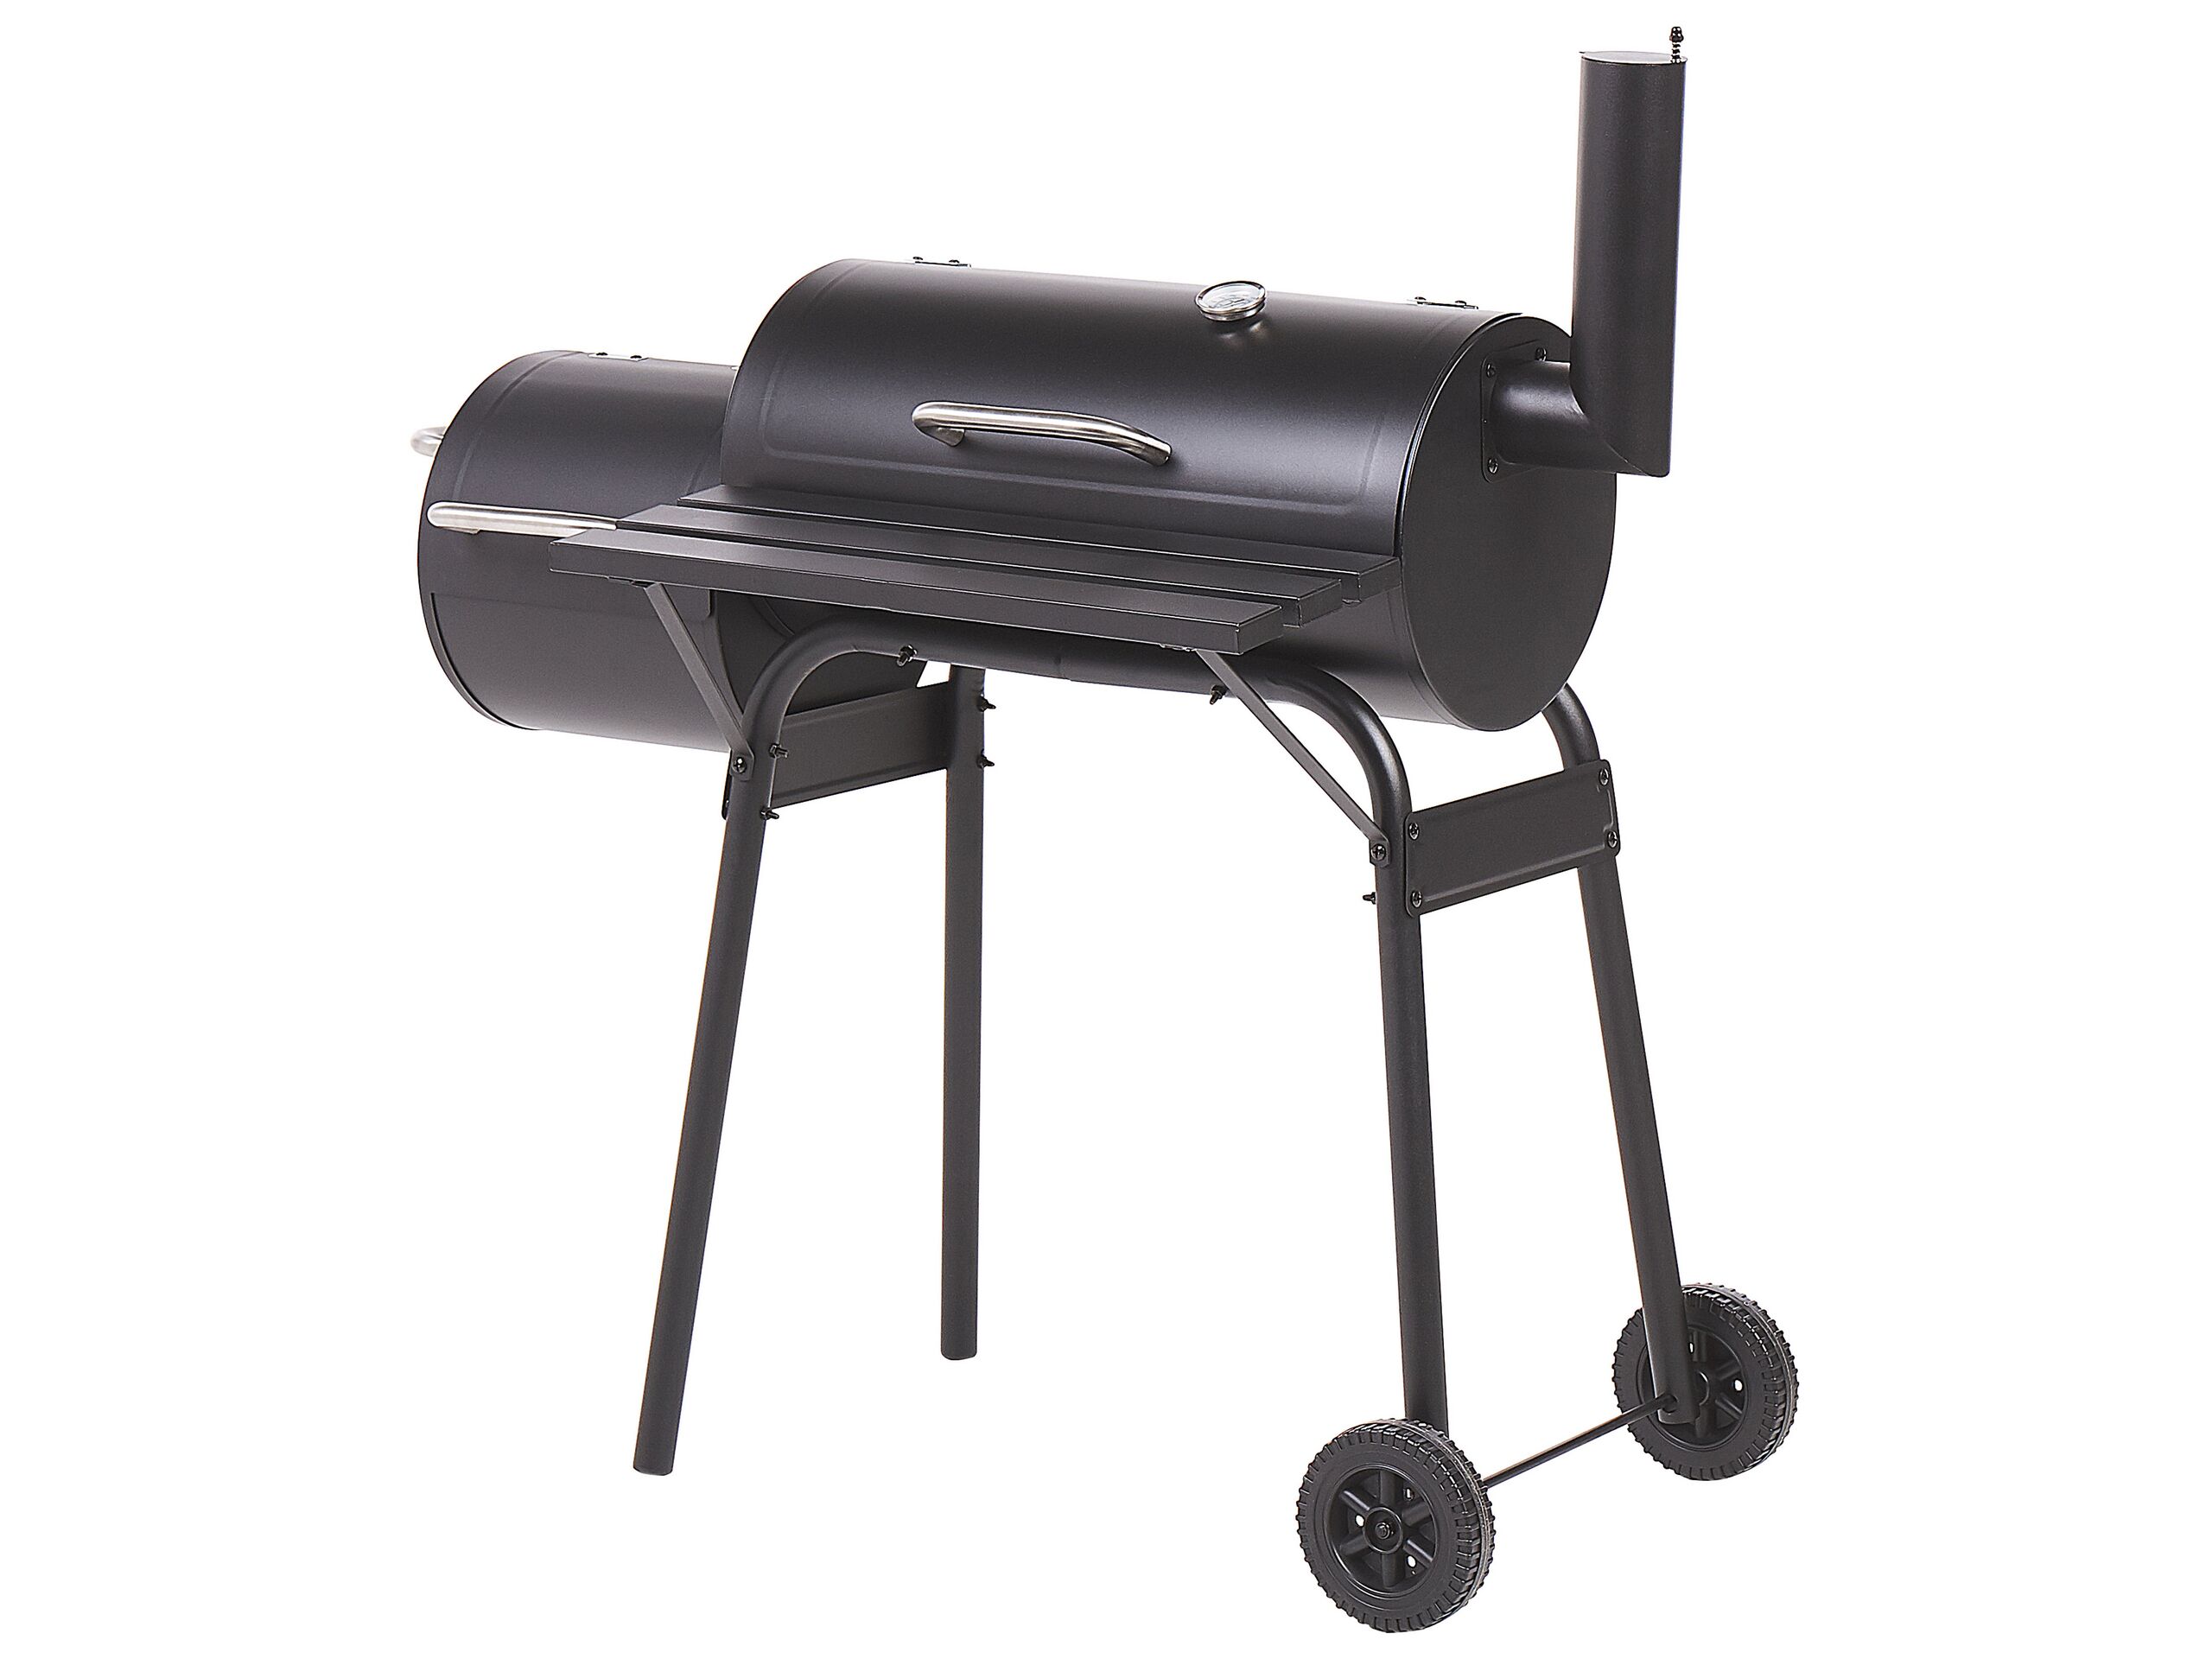 Charcoal Bbq Grill Black Steel With Lid Wheeled Cooking Grate Shelf Offset Smoker Beliani